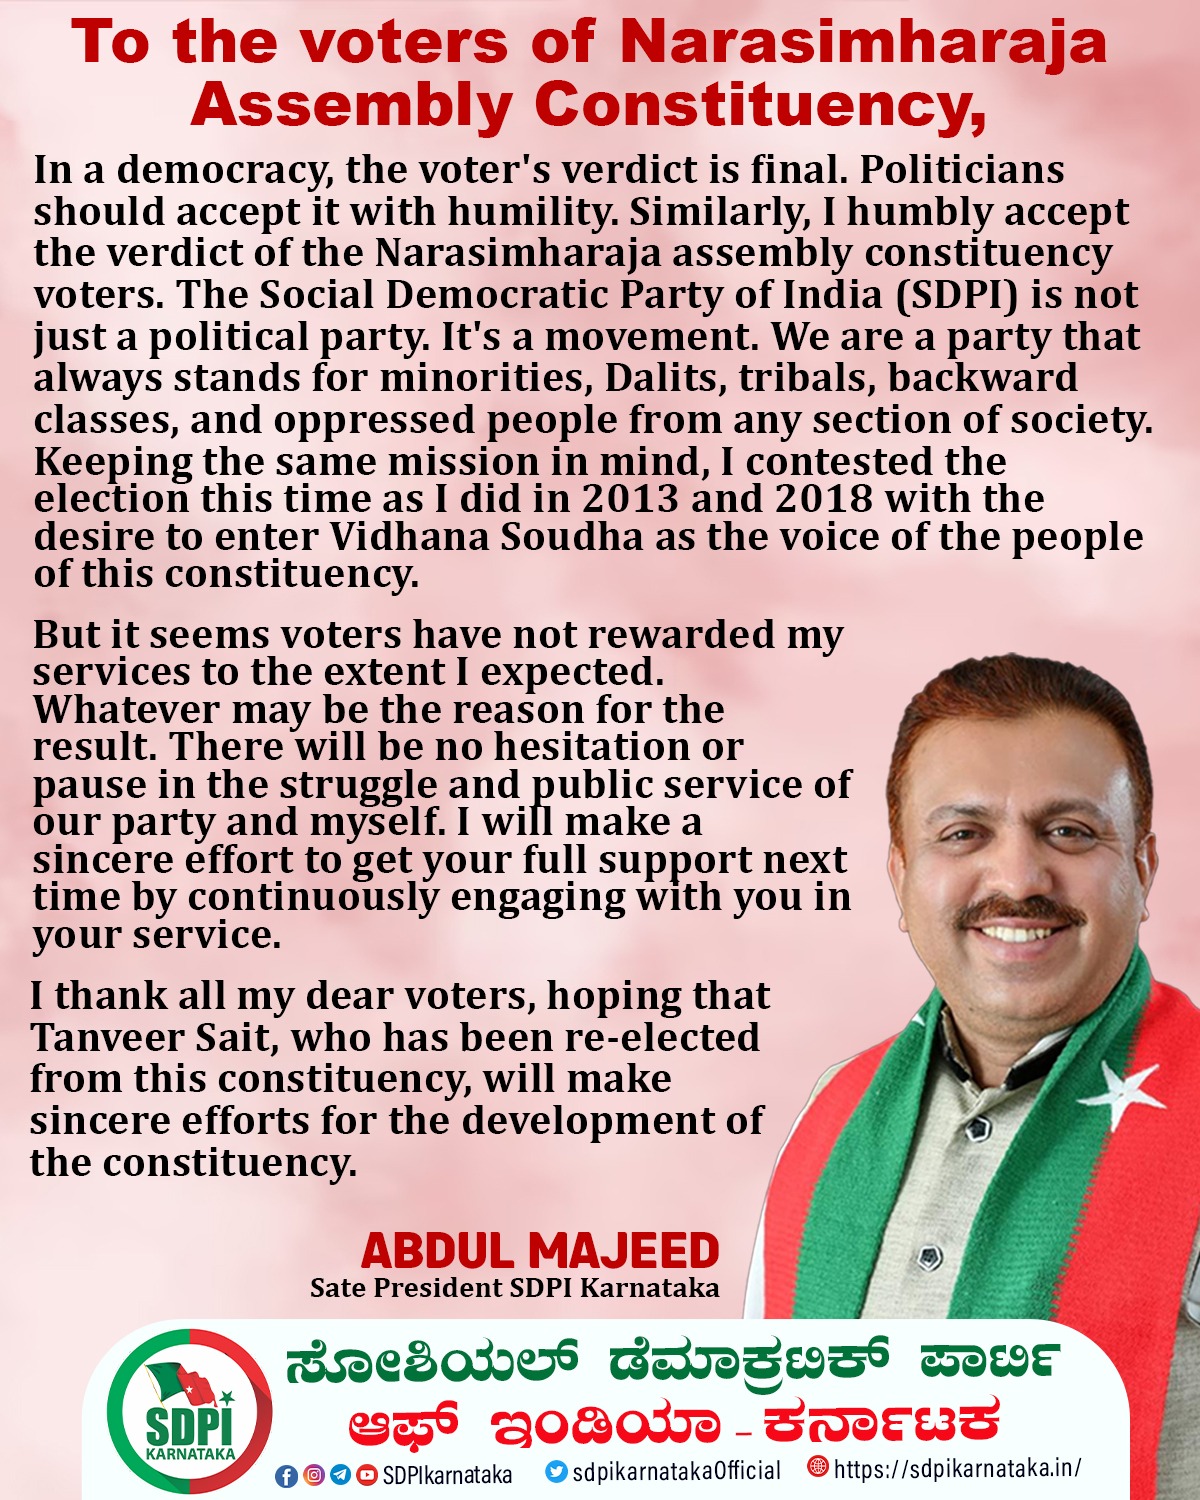 To the voters of Narasimharaja Assembly Constituency,